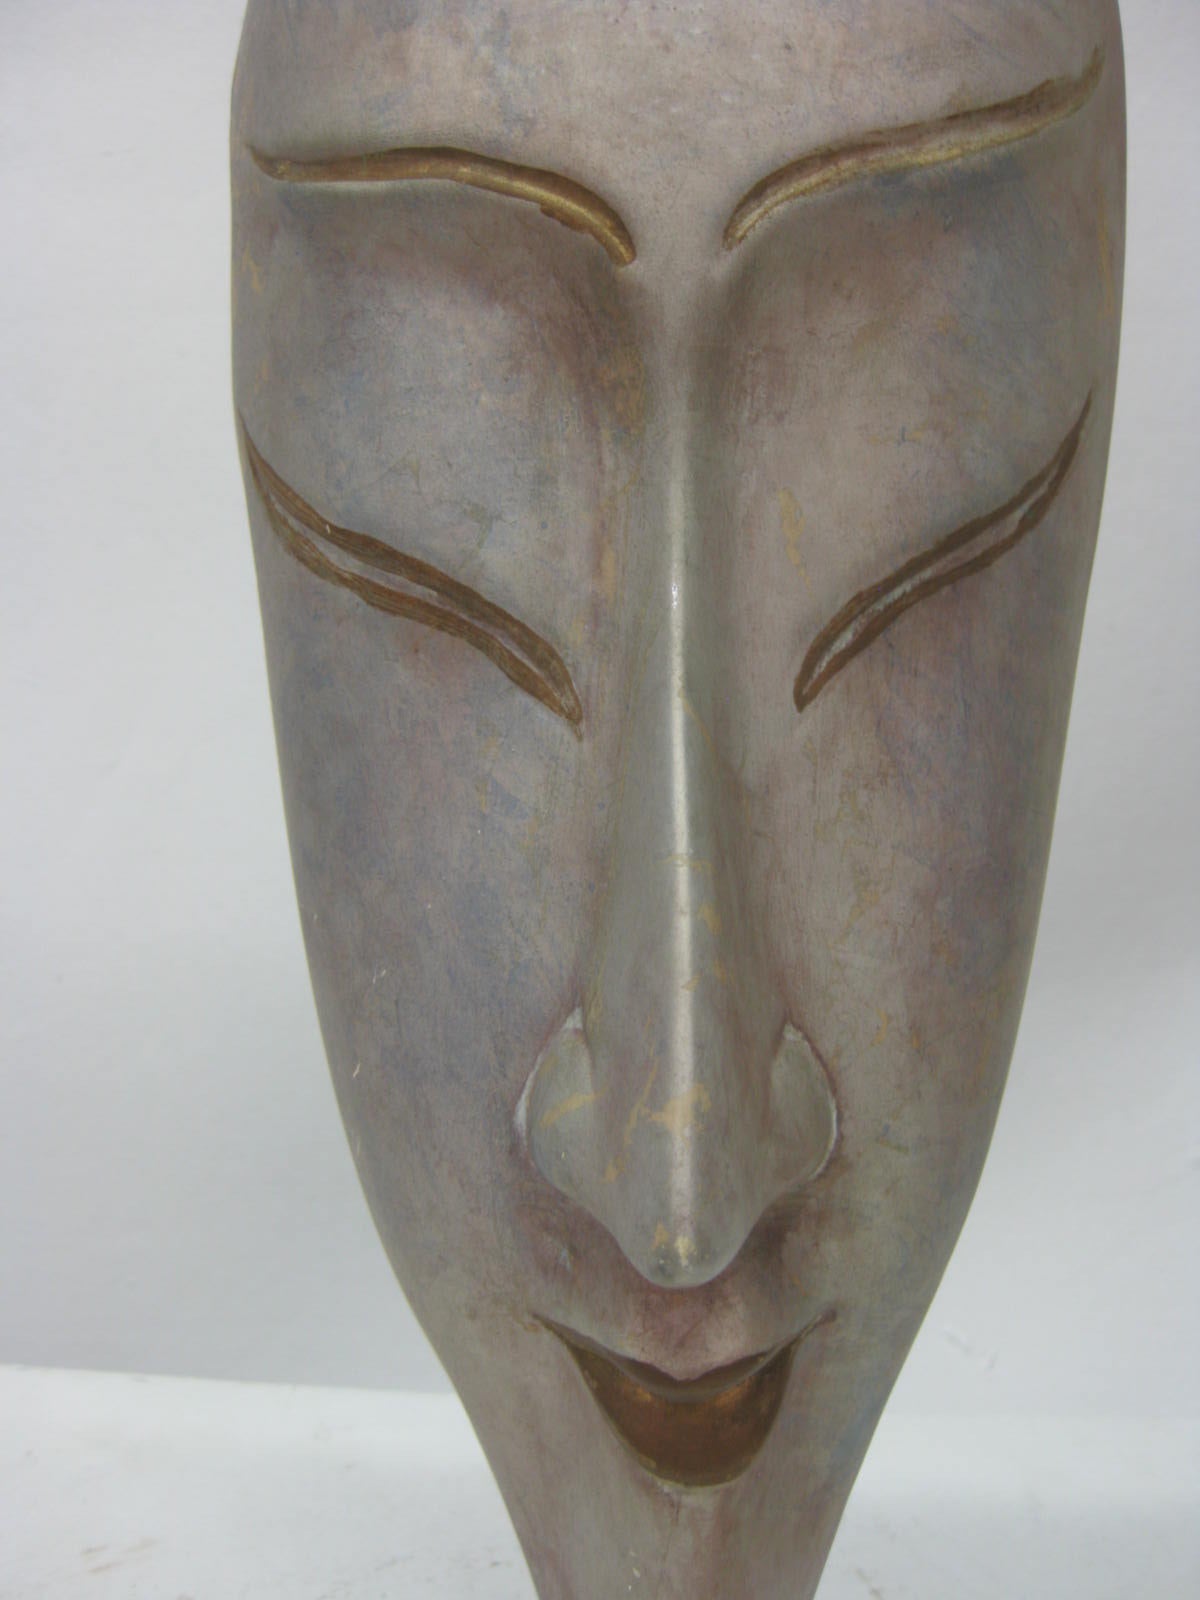 This hand painted mask featuring a female face. Gold accents that highlight lips and eyes suggest Japanese culture.
It is resting on a clear Lucite mounted base.